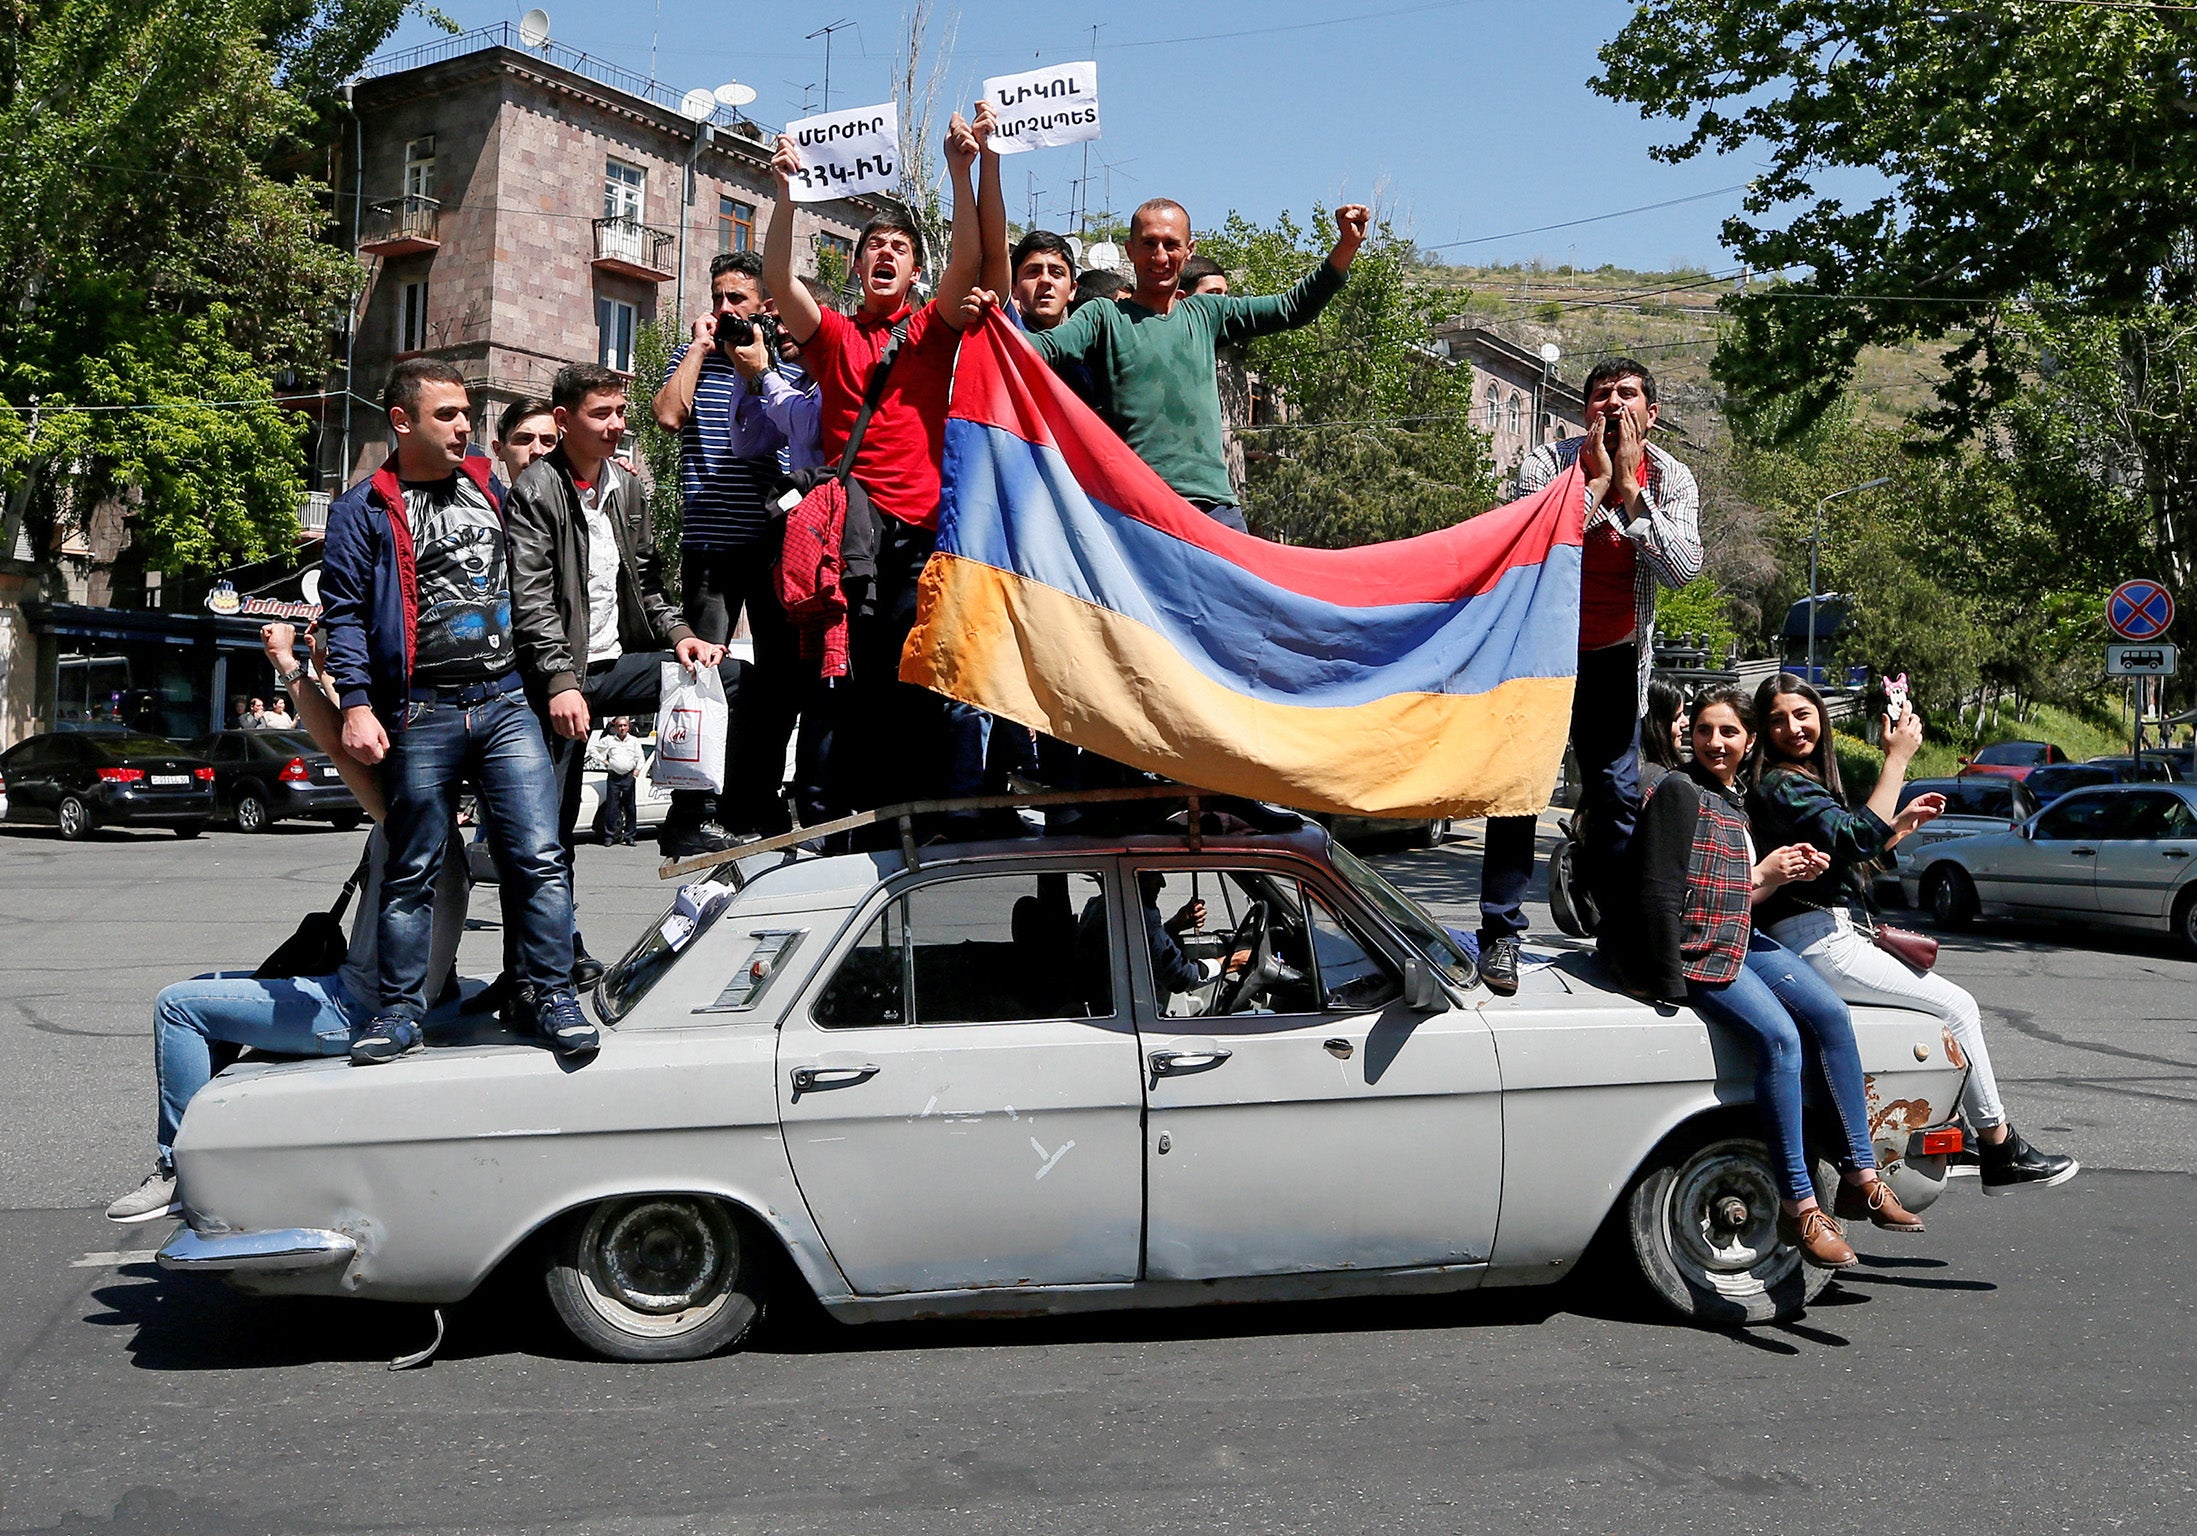 Armenia protests: Russia appears to back old regime as uncertainty grows  over future government, The Independent